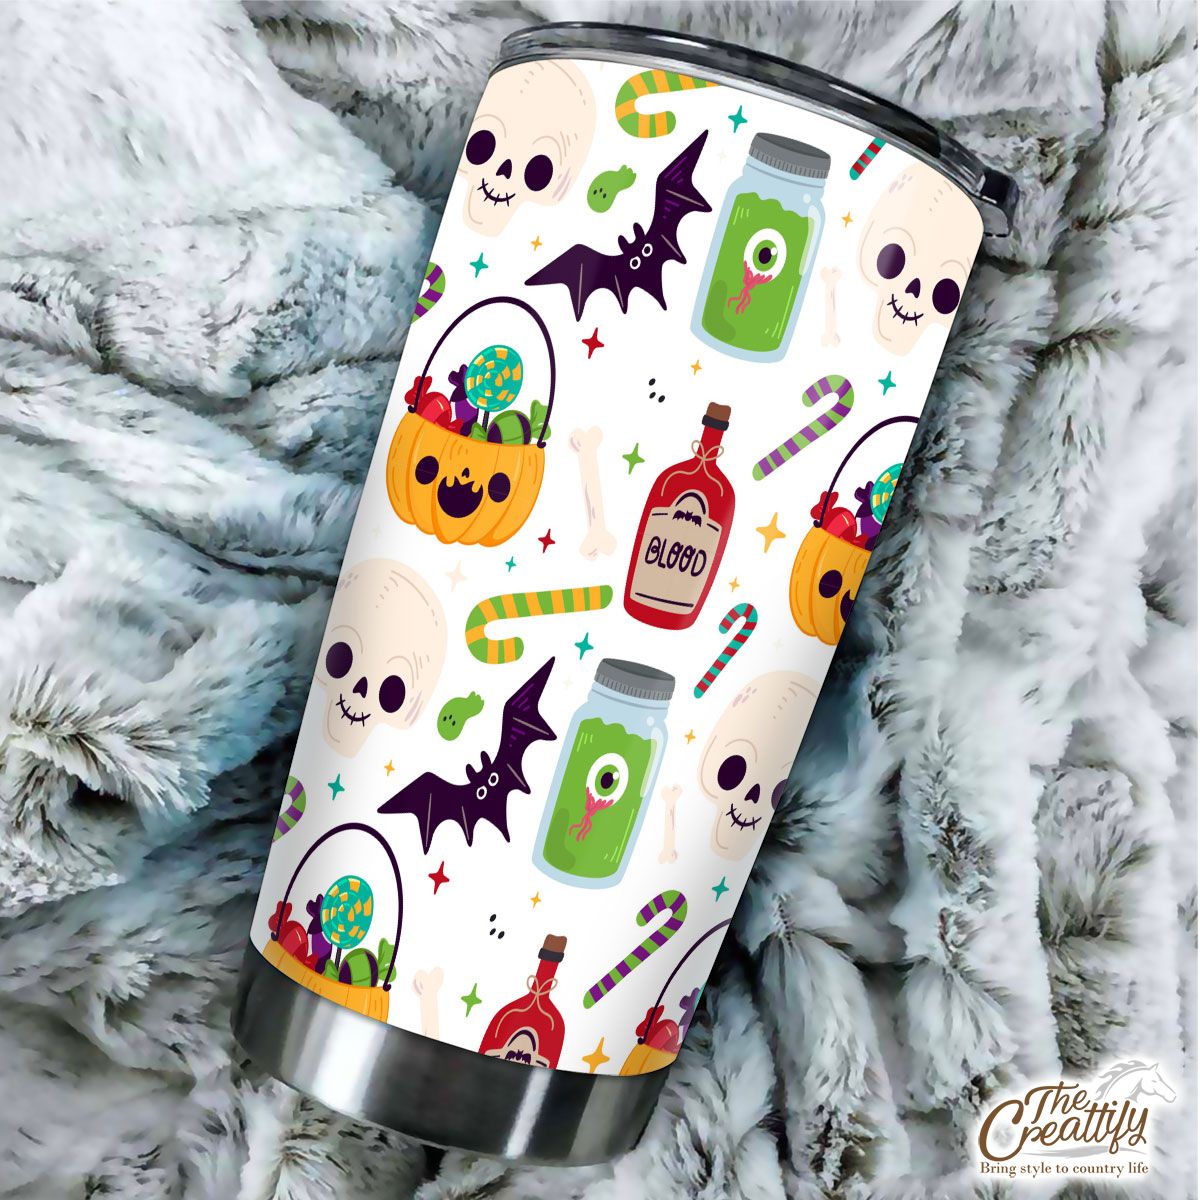 Cute Pumpkin, Jack O Lantern Full of Candy, Witch Potions and Bat White Halloween Tumbler